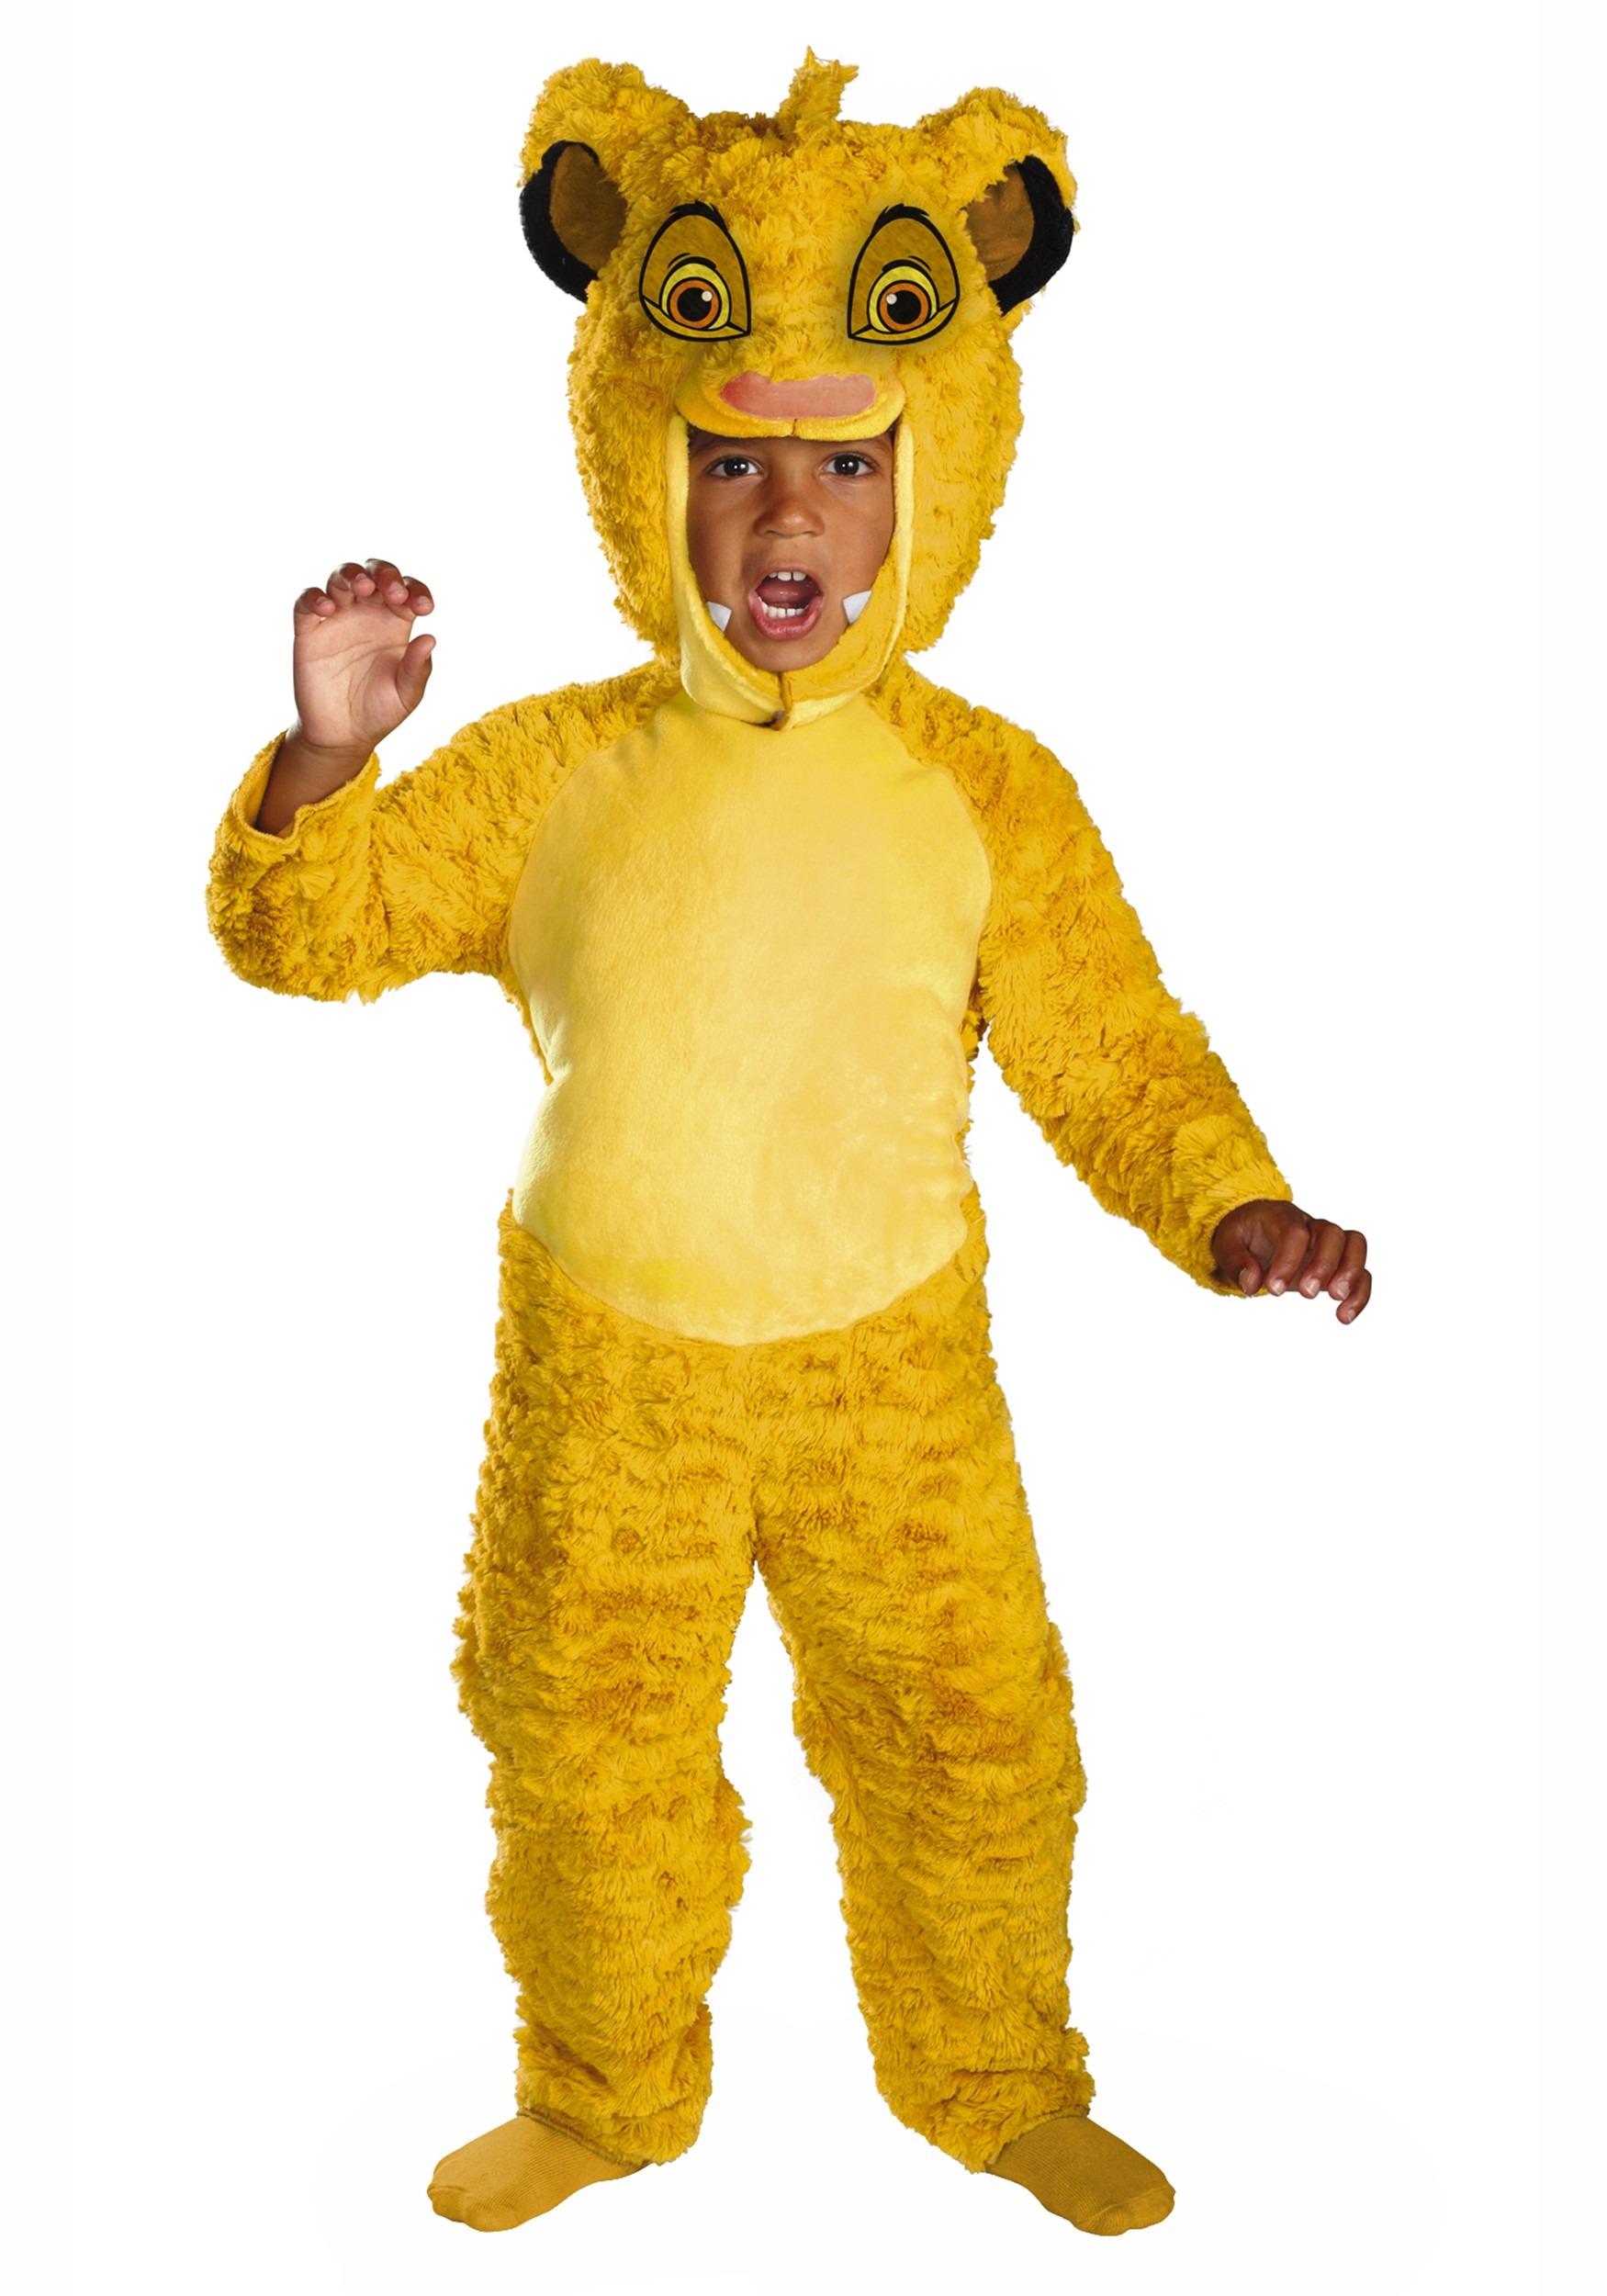 Fantasia do Macaco George - Deluxe Curious George Toddler Costume